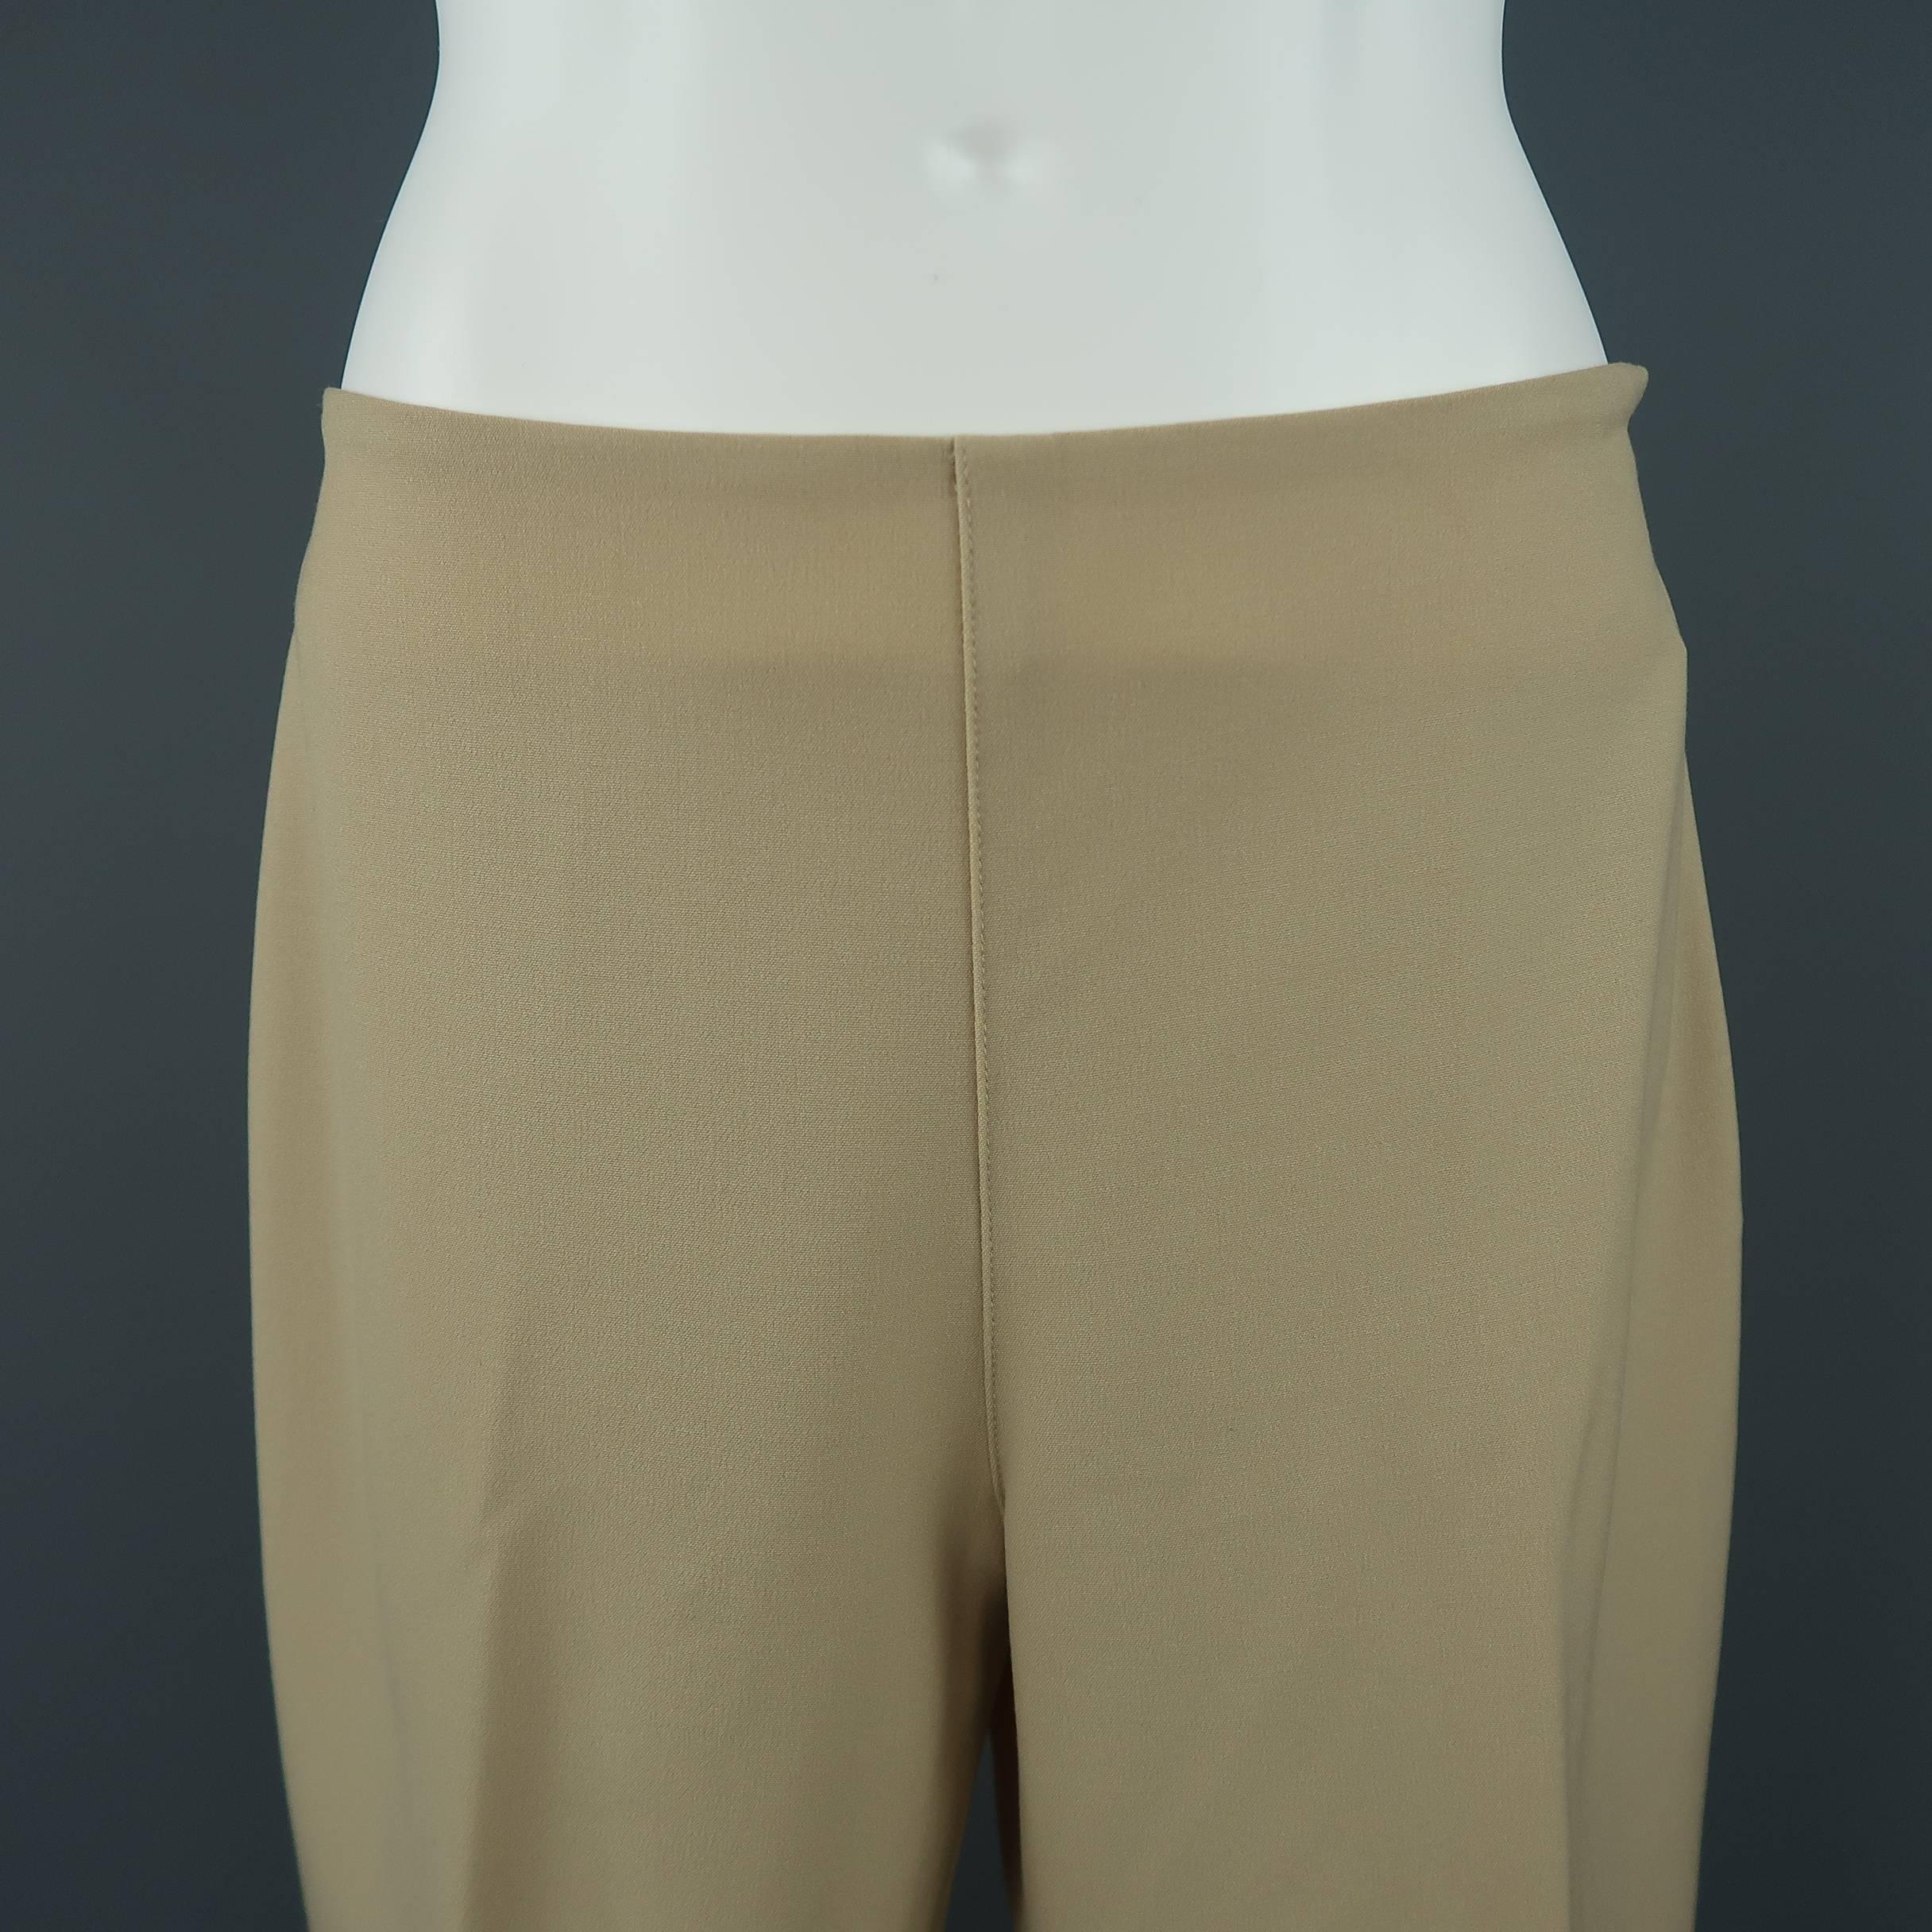 RALPH LAUREN BLACK LABEL dress pants come in a tan khaki stretch wool with a high rise and skinny fitted silhouette.
 
Good Pre-Owned Condition.
Marked: 6
 
Measurements:
 
Waist: 29 in.
Rise: 9.5 in.
Inseam:  27 in.
